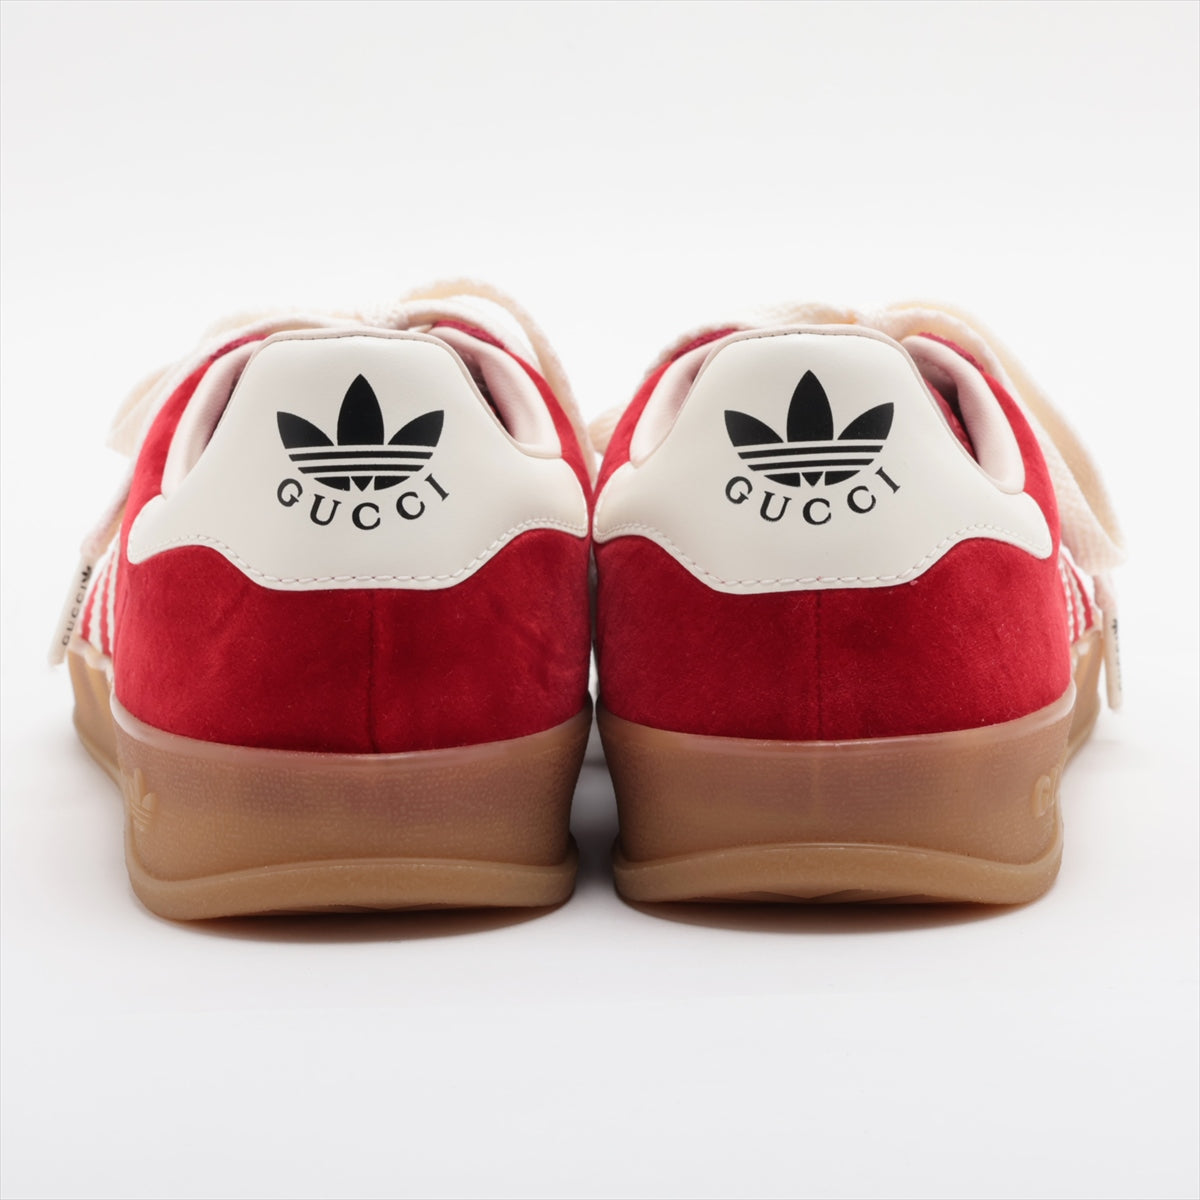 Gucci x adidas Gazelle Velour & leather Sneakers 25.5cm Ladies' Red x white 707848 HQ8853 Replacement string box There is a bag